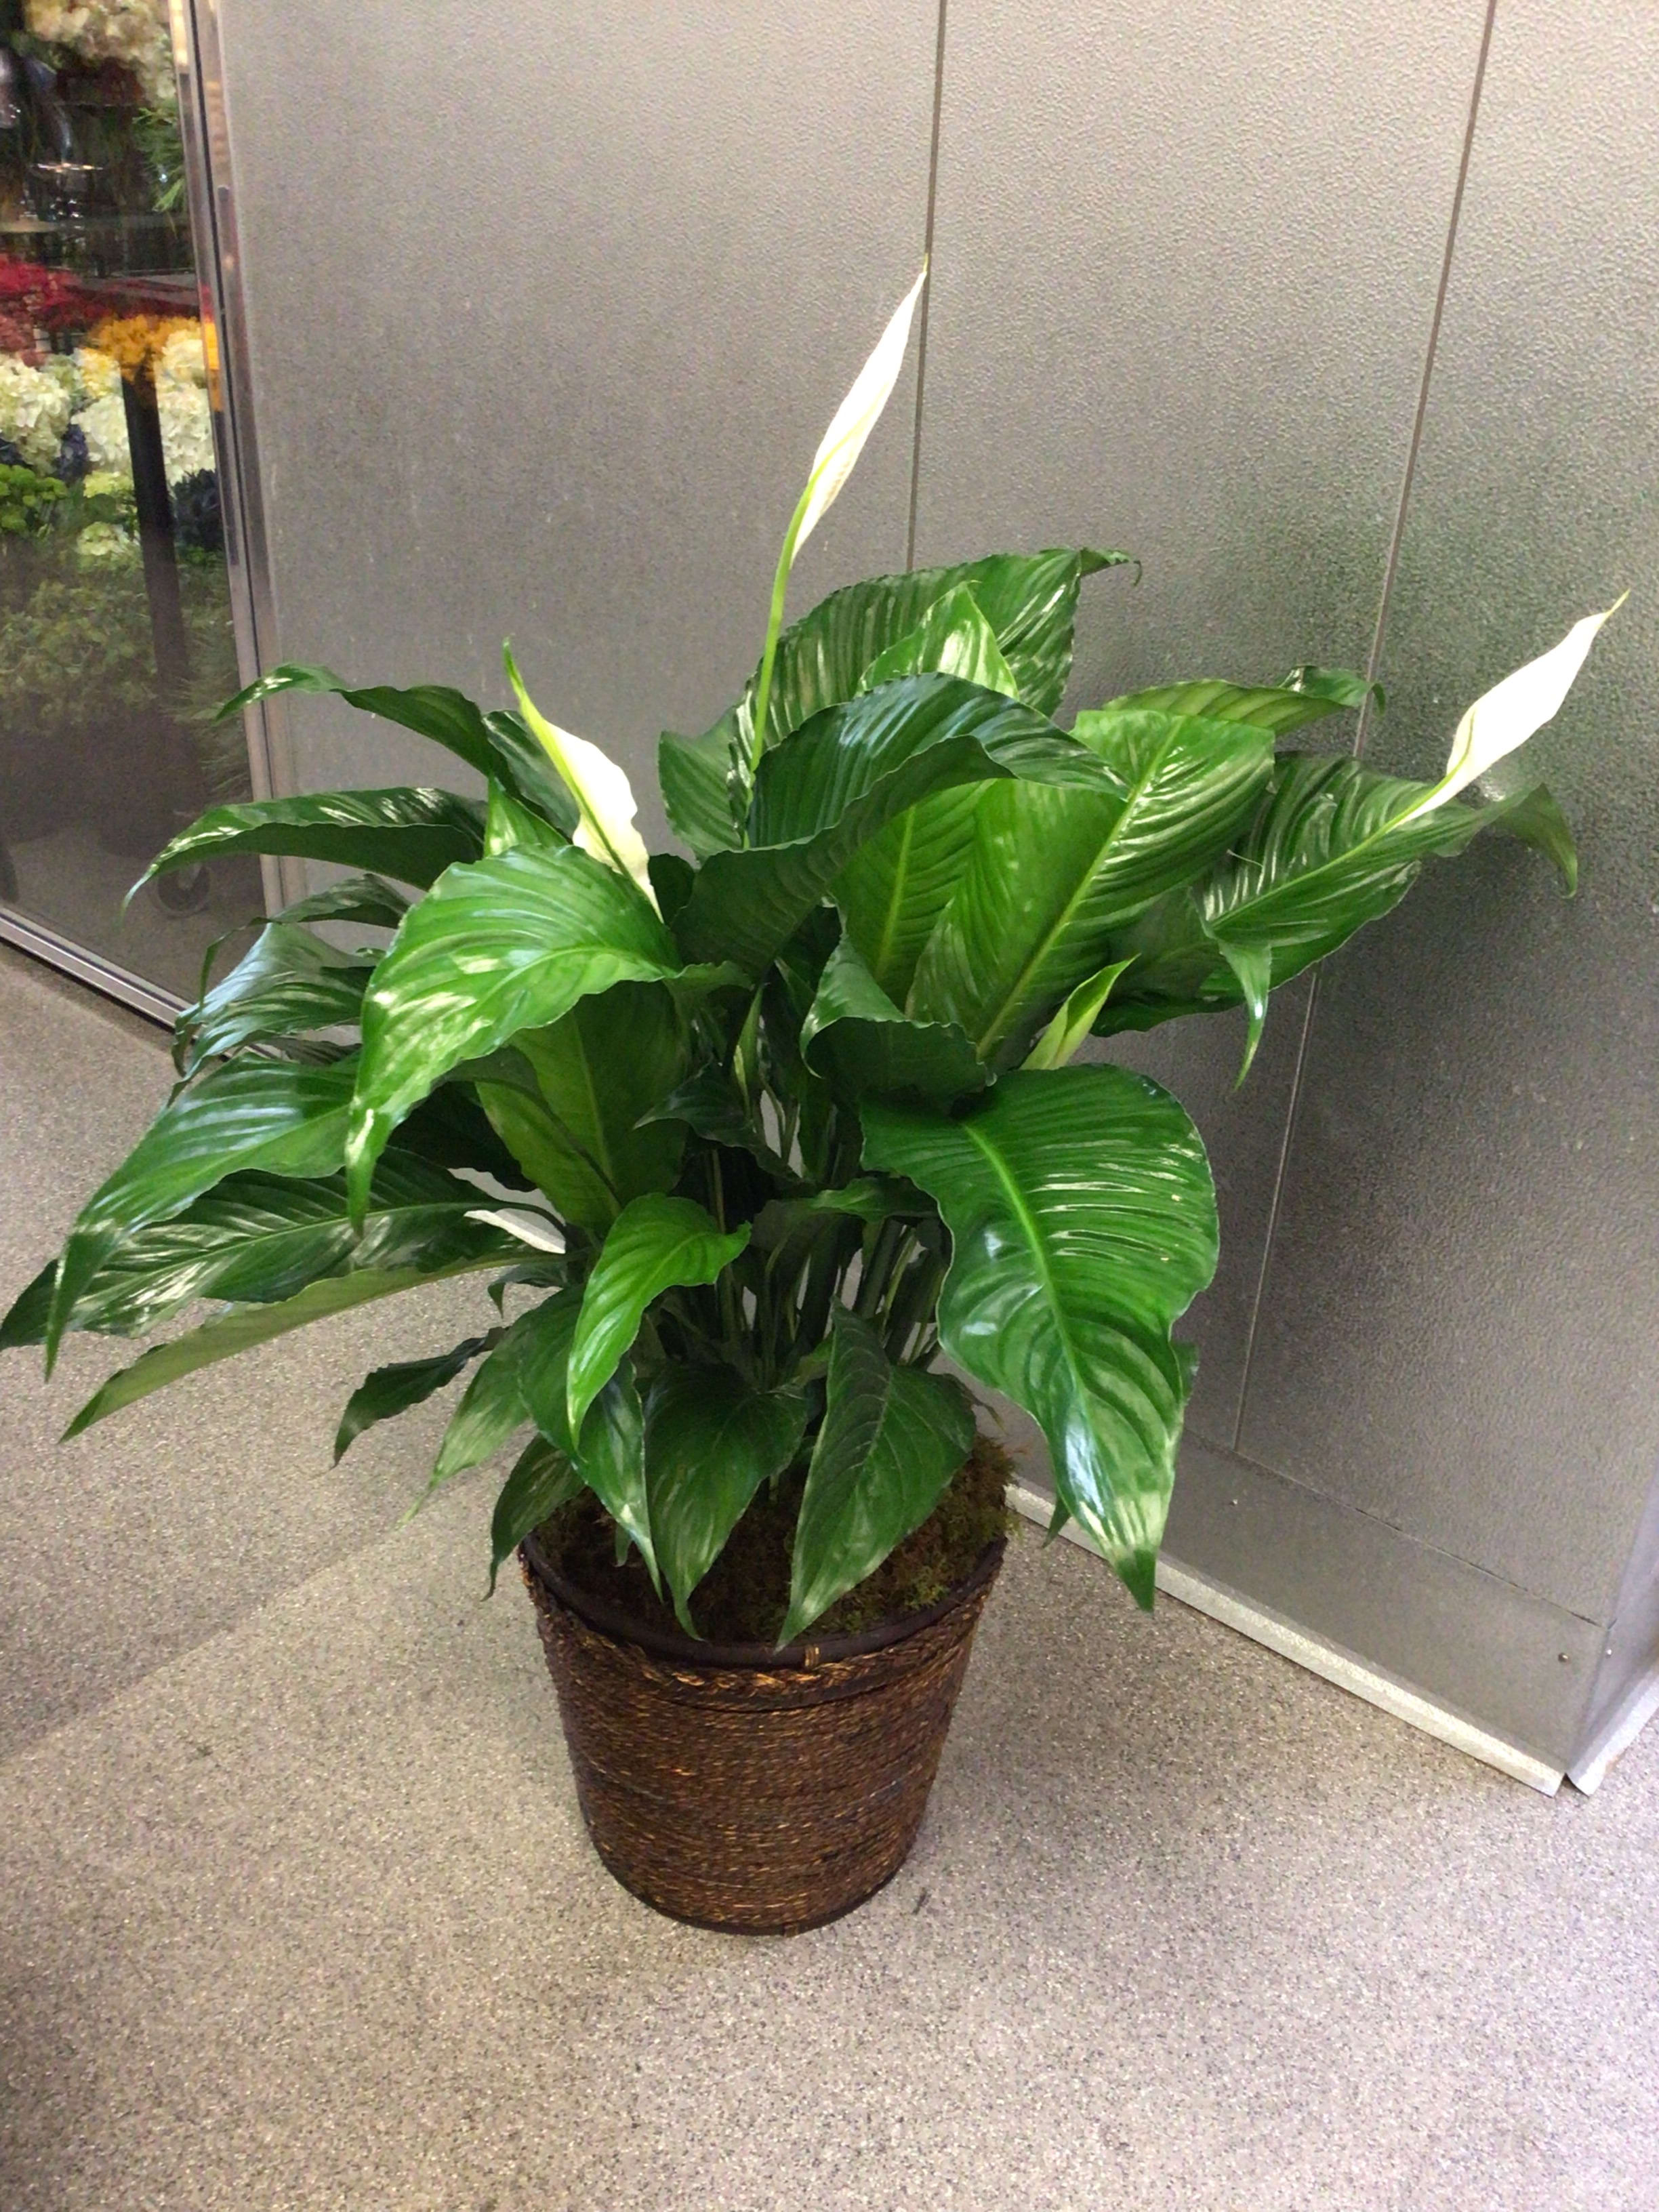  Peace Lily in a basket -  10 inch plant in a basket